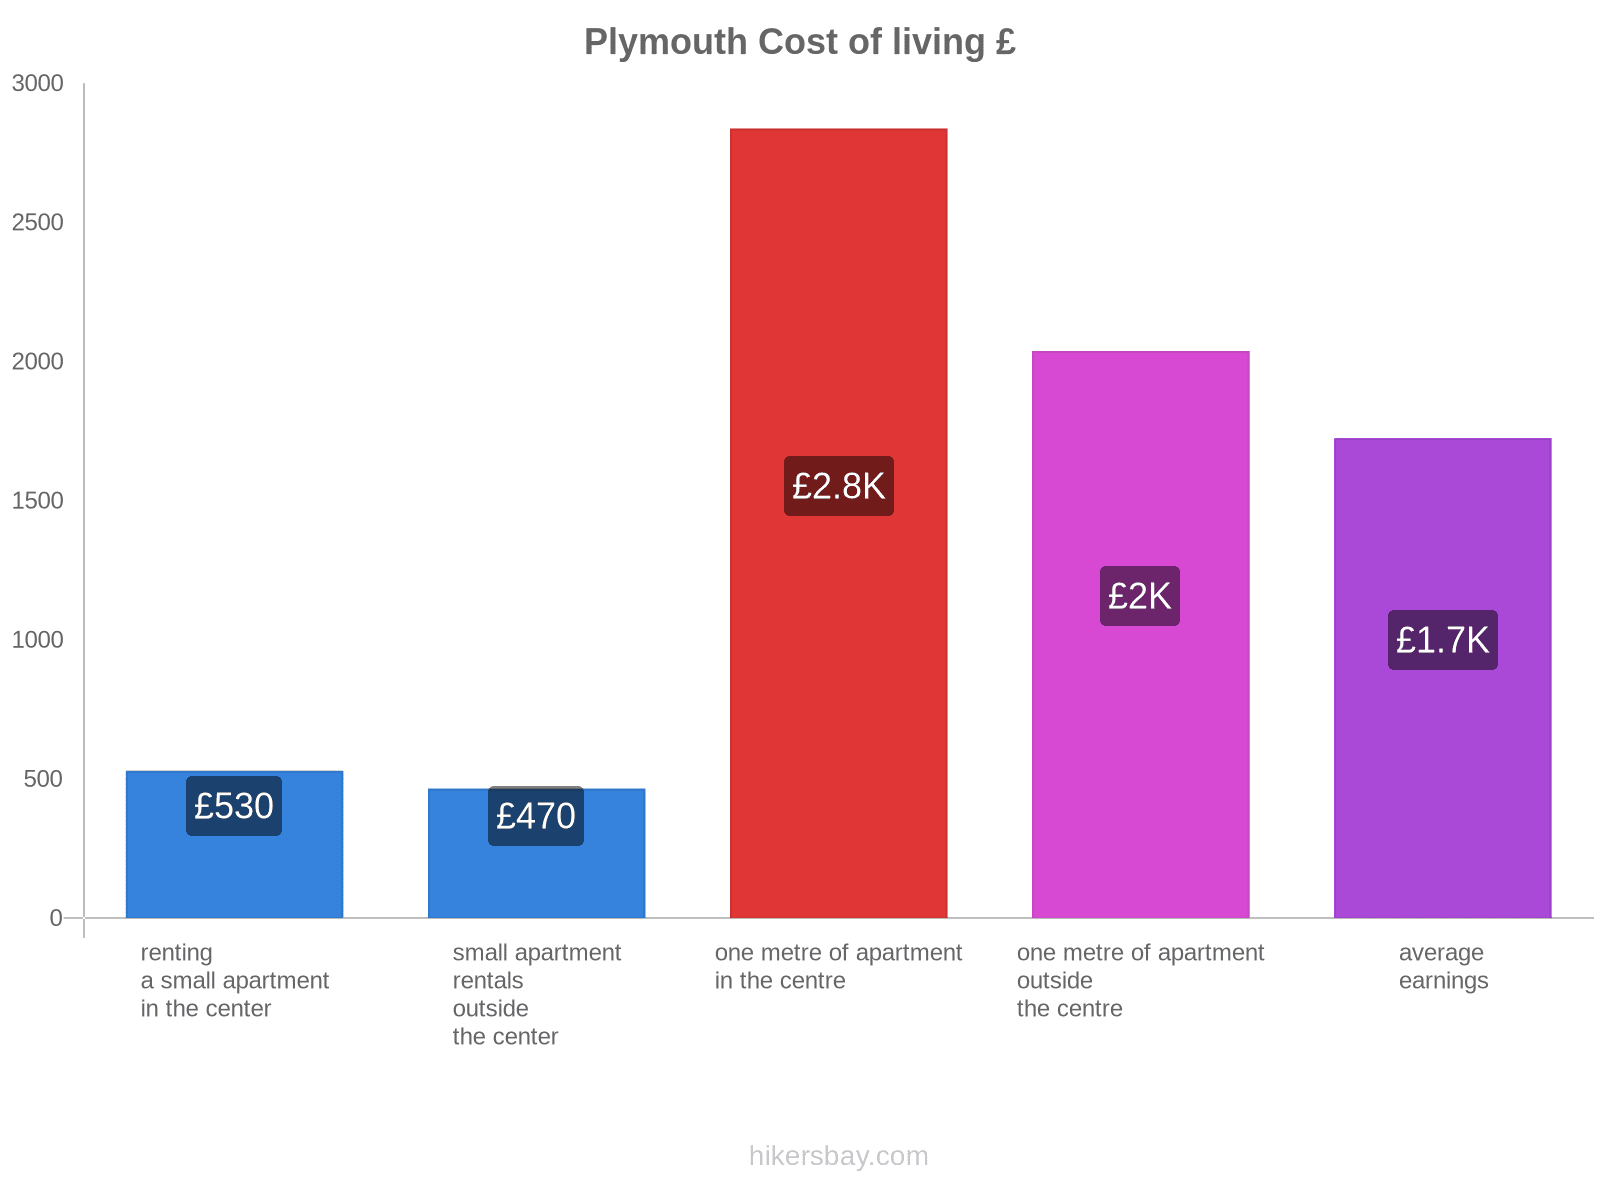 Plymouth cost of living hikersbay.com